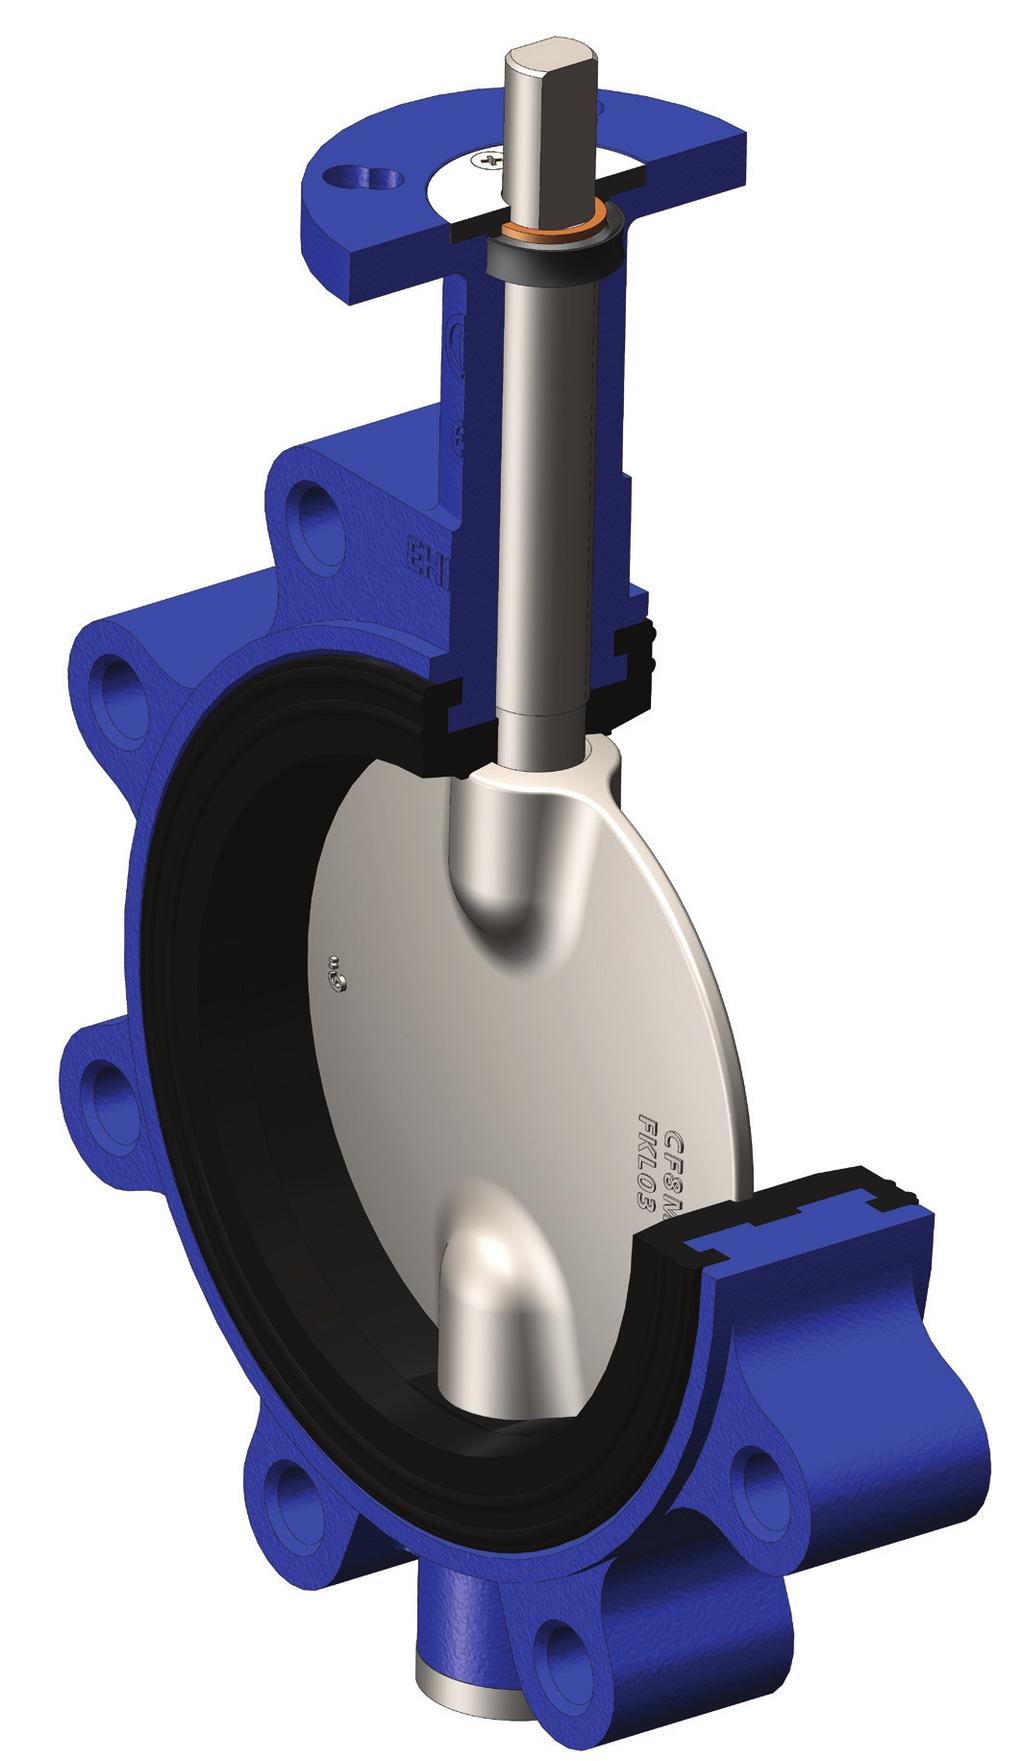 Pratt BF Series Butterfly Valve Design Details: Butterfly Valve, sizes 2" through 48" 2"-12" 230psi, 14"-48" 150psi Top flange conforms to ISO 5211 and KV industrial standard allowing a universal